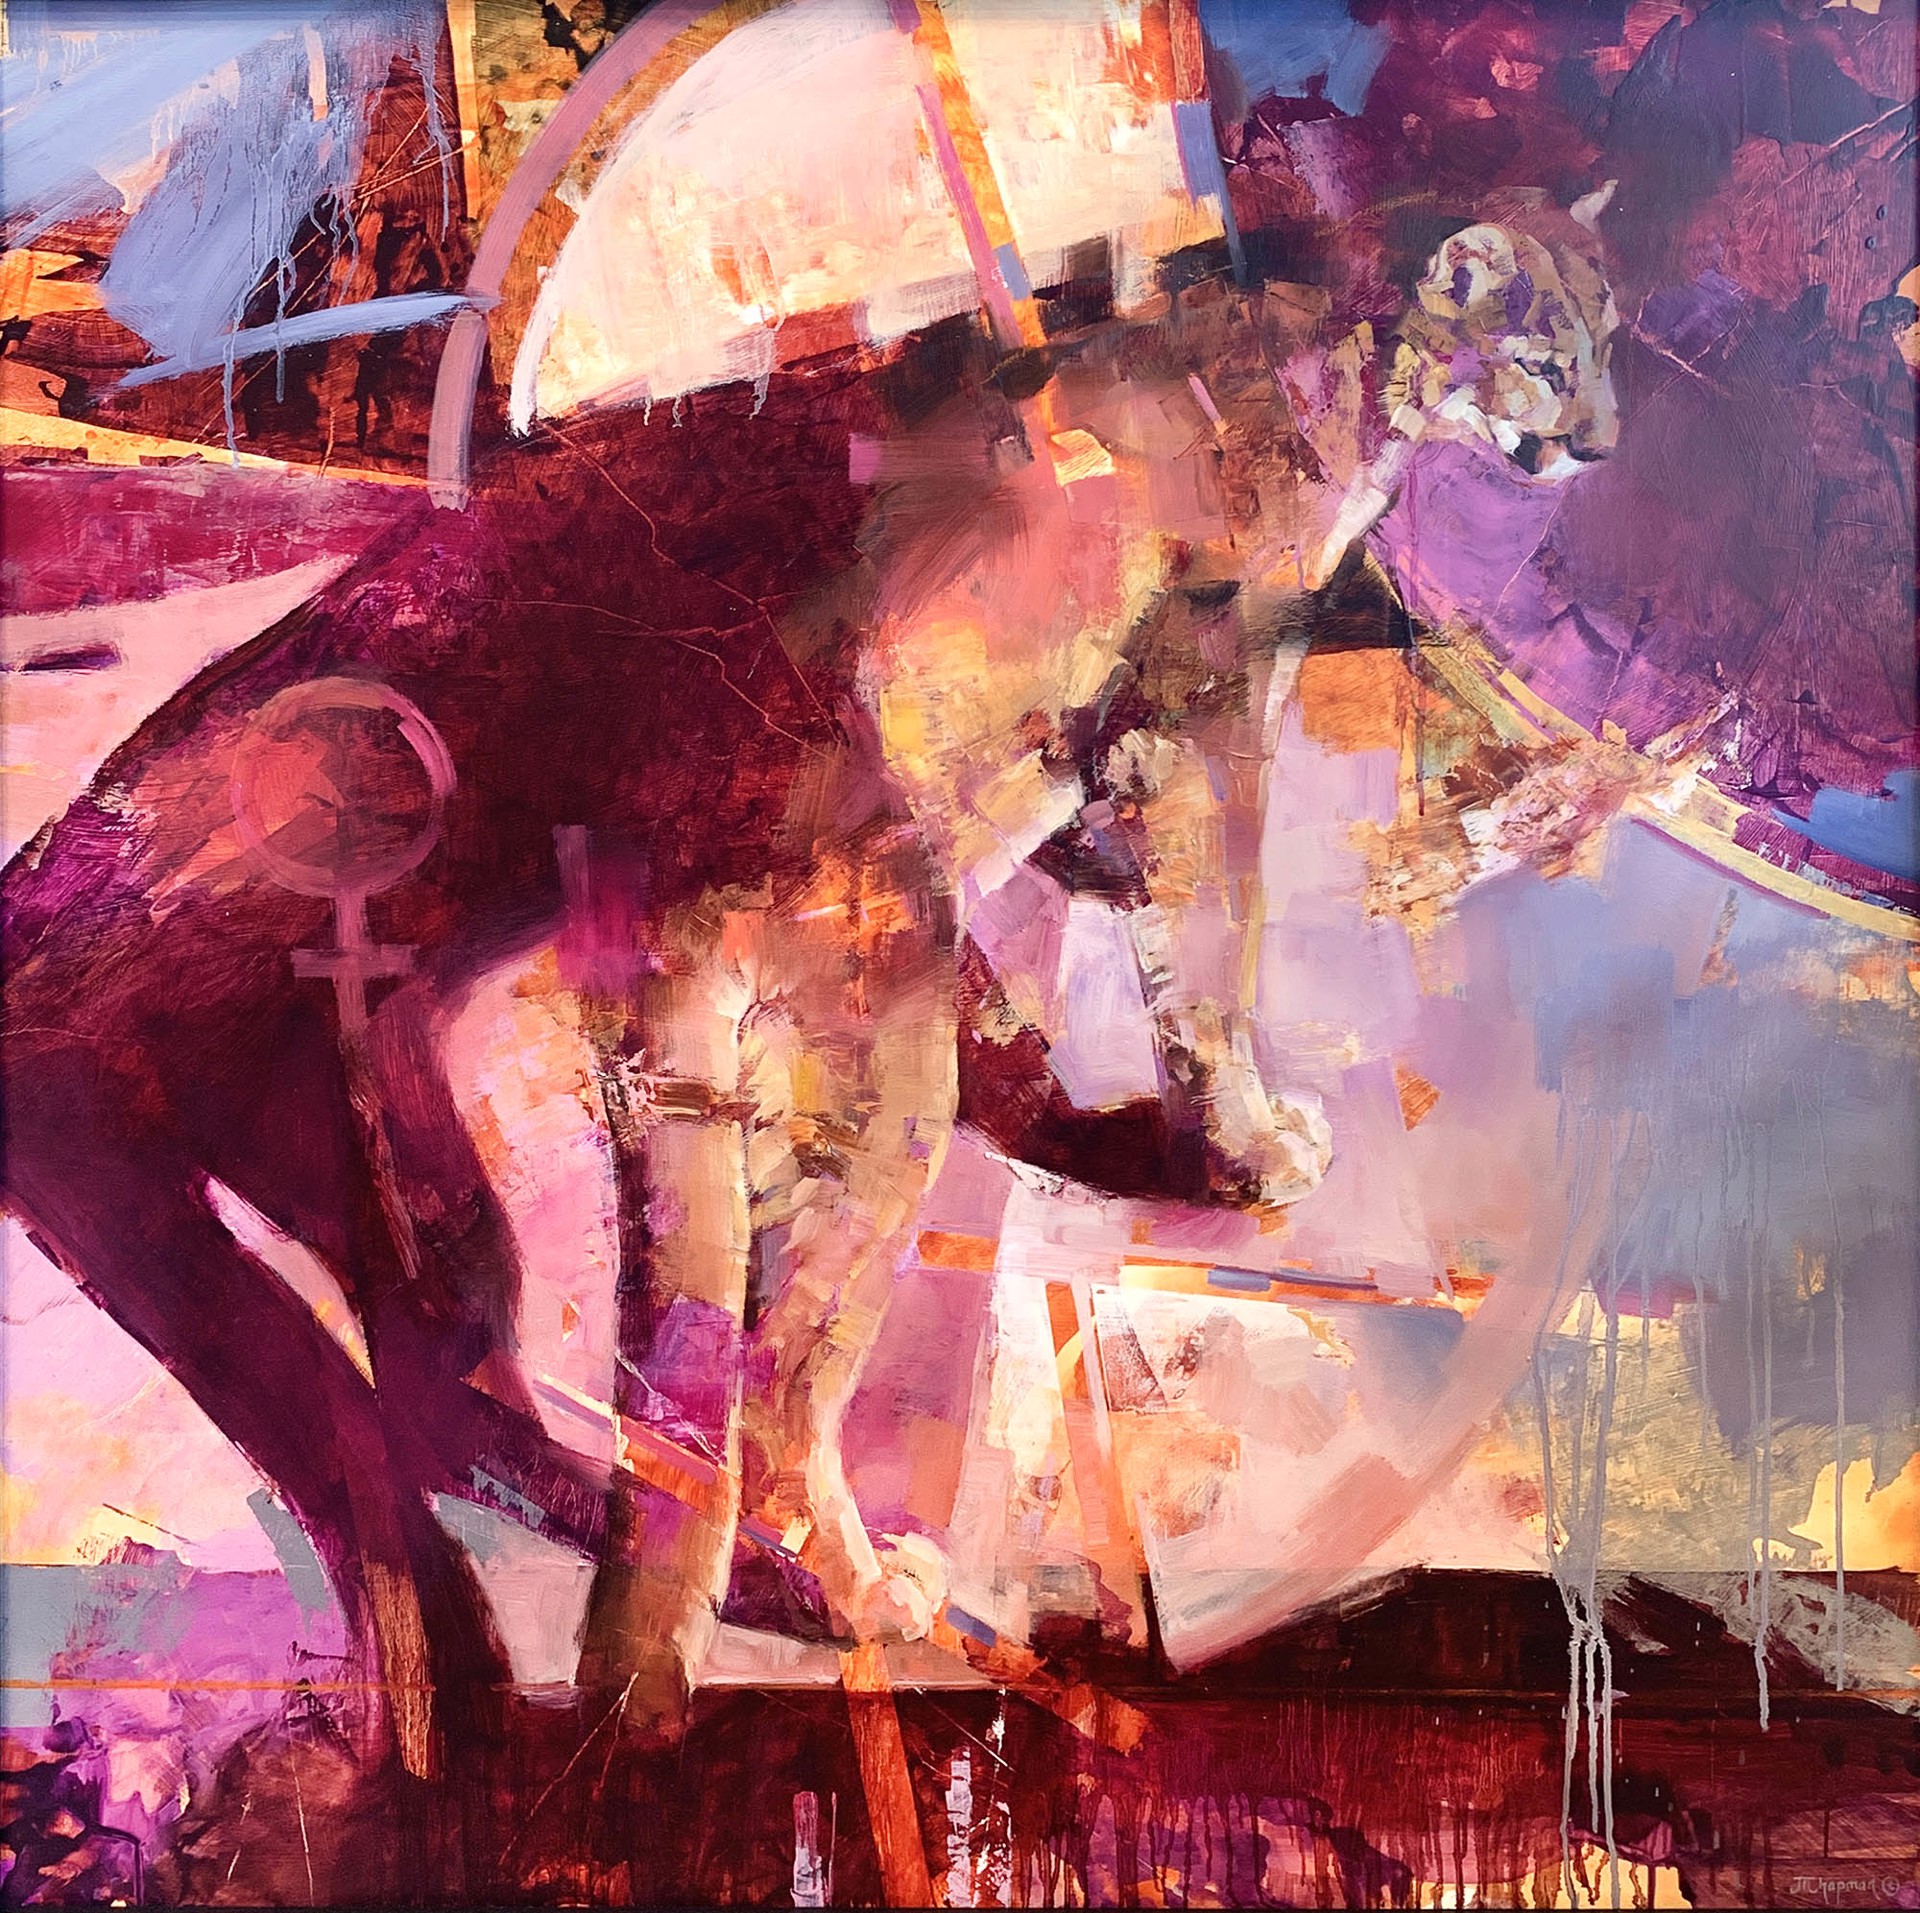 Original Mixed Media Painting Featuring A Mountain Lion Painted Expressively Into Abstracted Background In Pinks Purples And Oranges